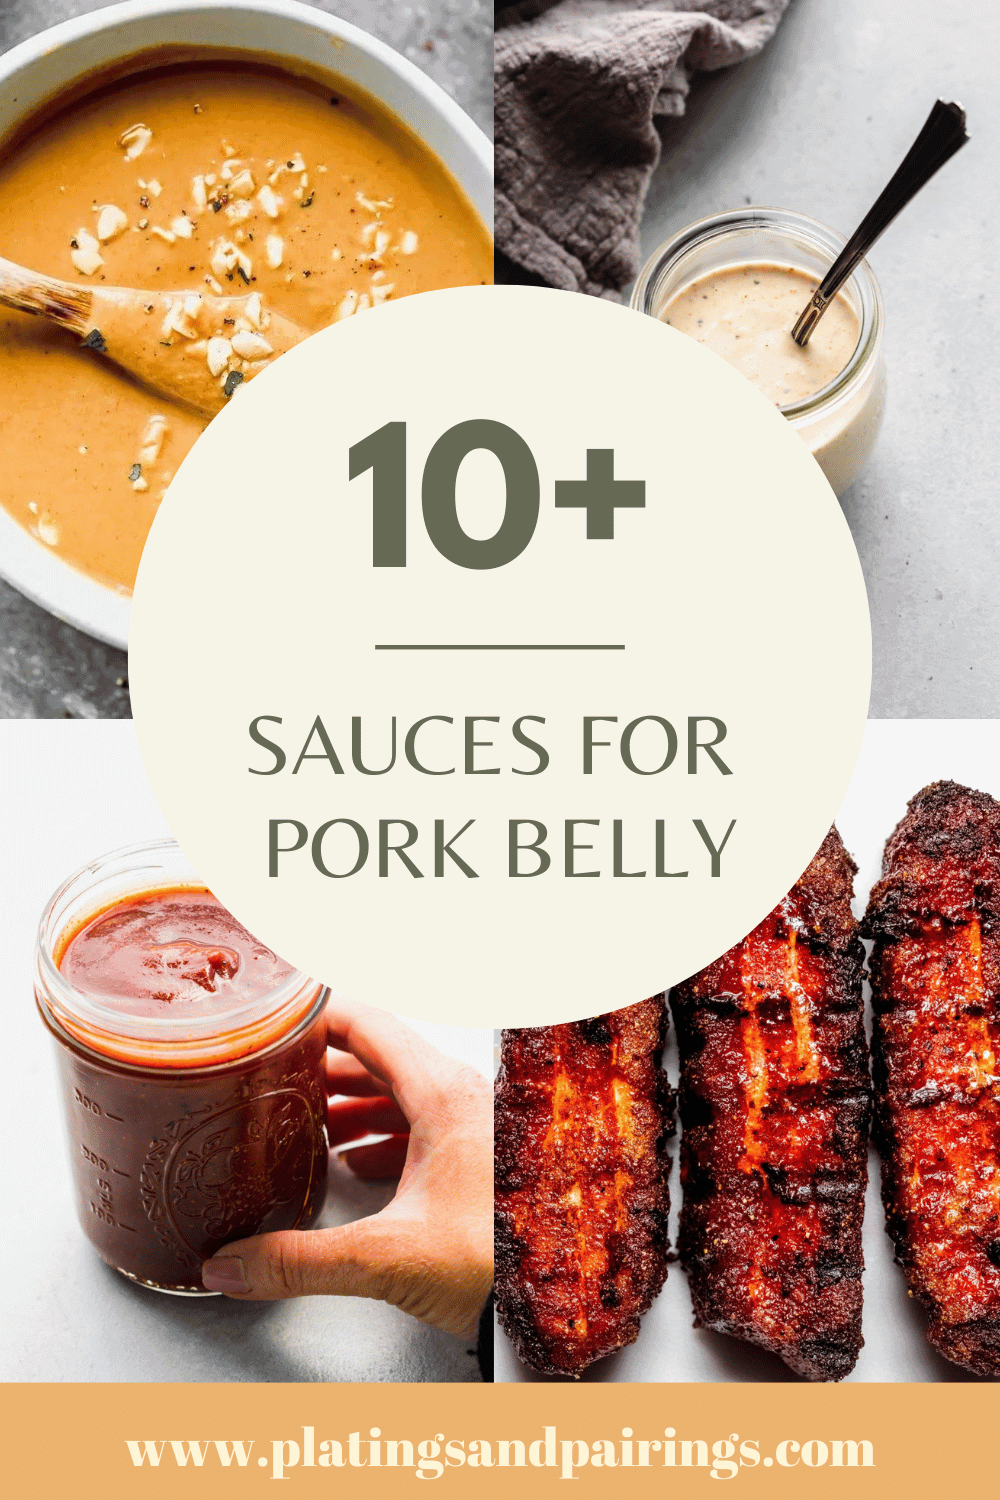 Collage of sauces for pork belly with text overlay.